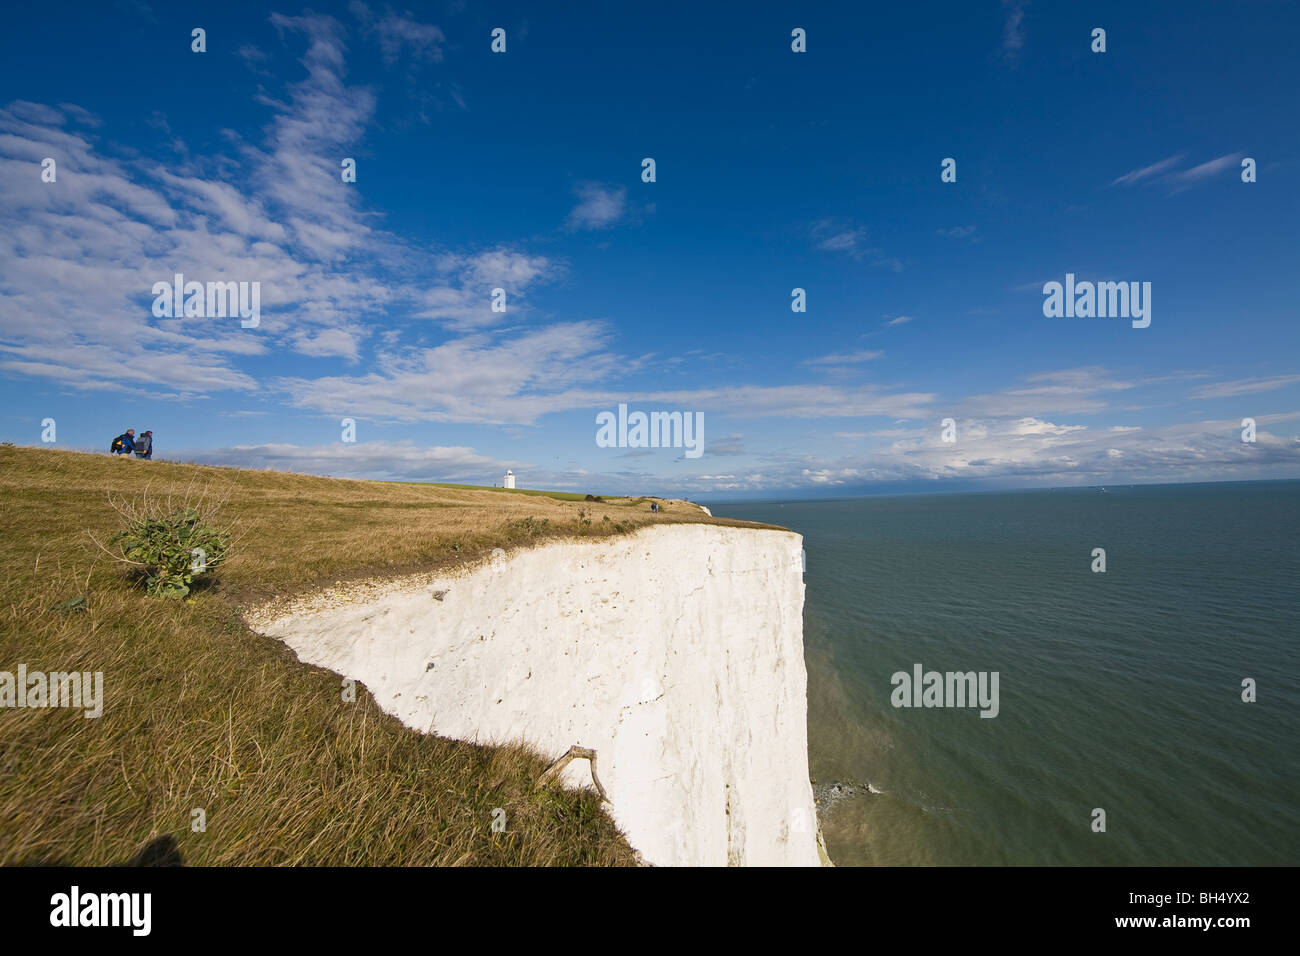 Hillwalking on the white cliffs along the coast of Dover. Stock Photo